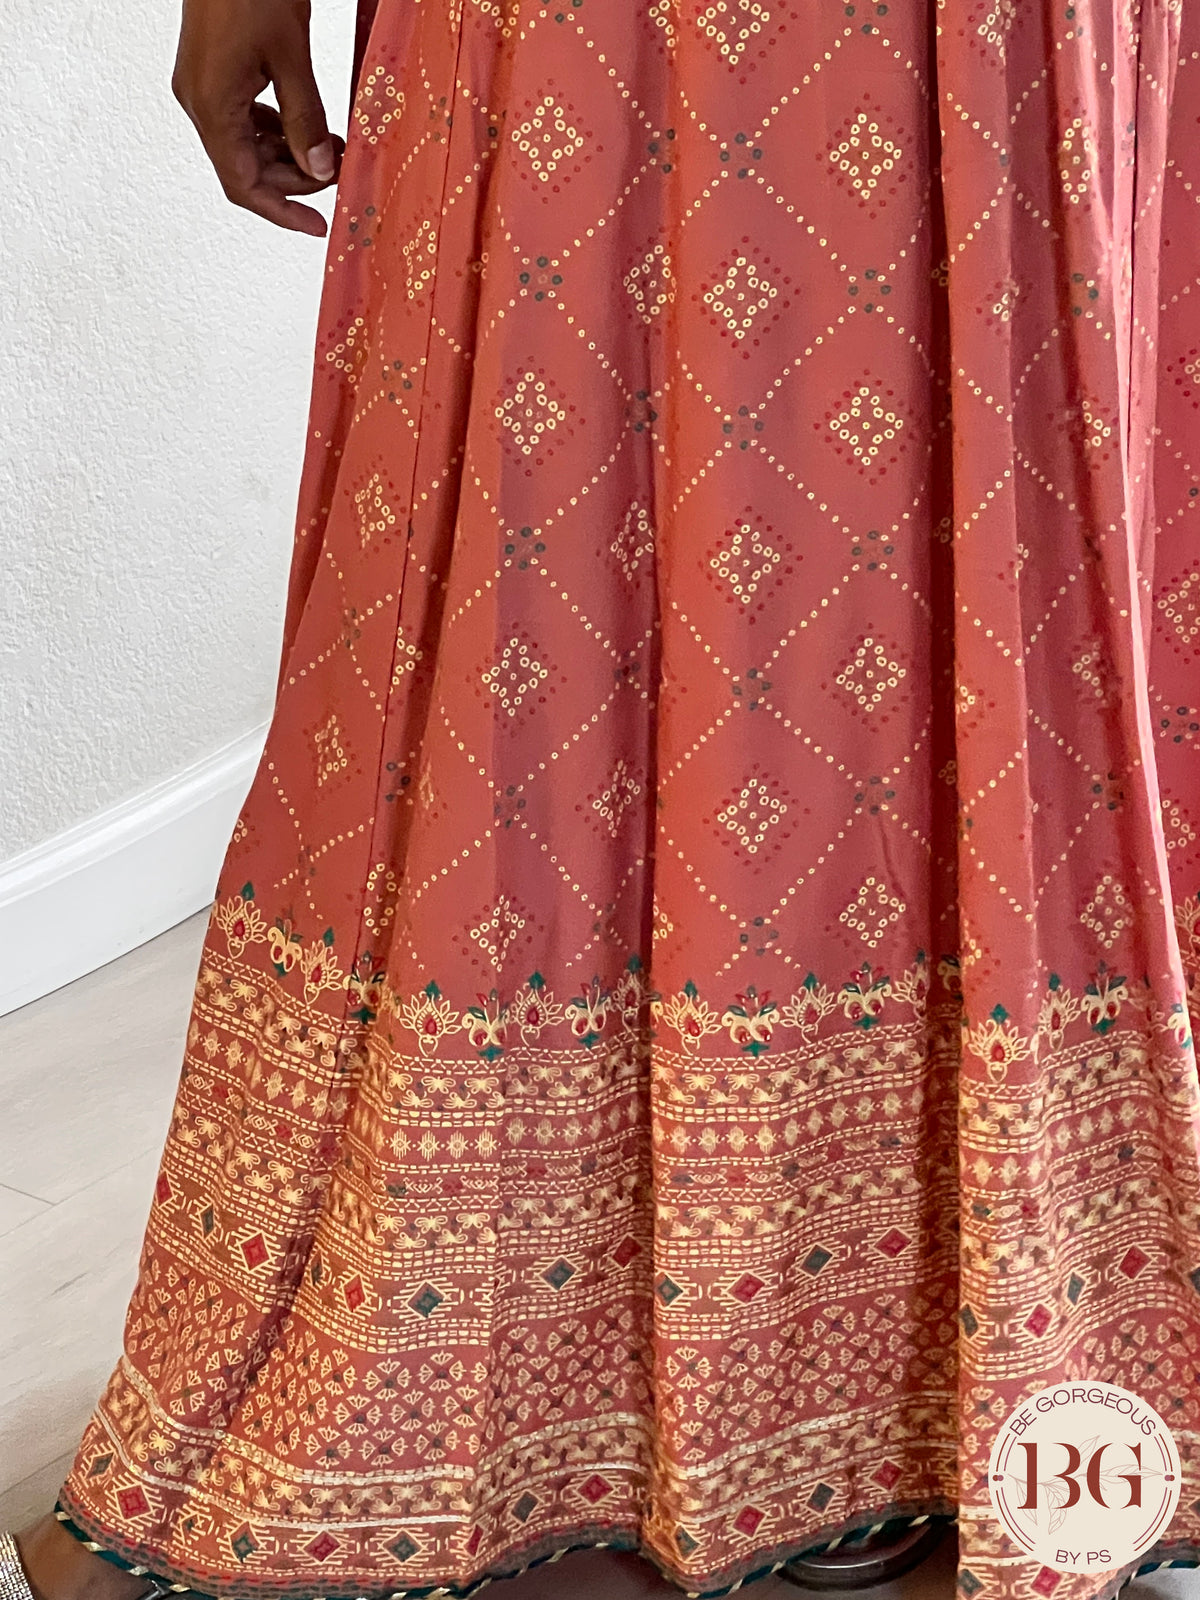 Full length anarkali gown 1 piece dress in gorgeous pink shade